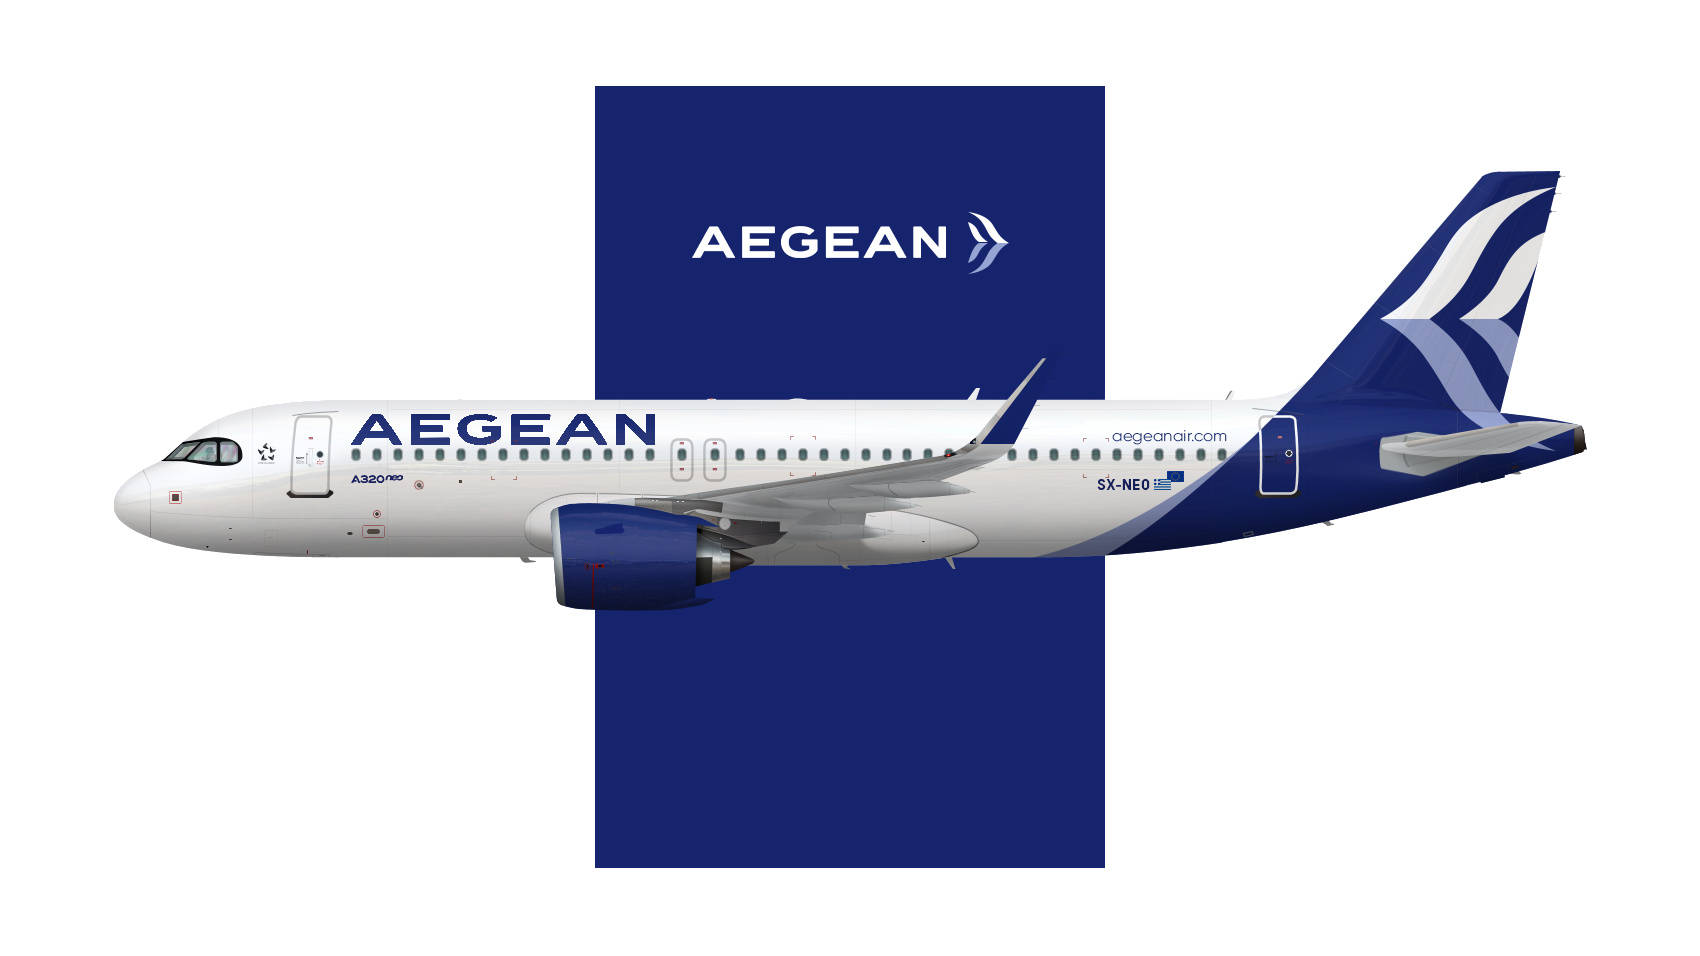 Aegeanairlines Flag Carrier Logo Och A320-plan. (note: Swedish Sentence Structure Is The Same As English In This Case, But With Swedish Spelling And Pronunciation For The Words.) Wallpaper